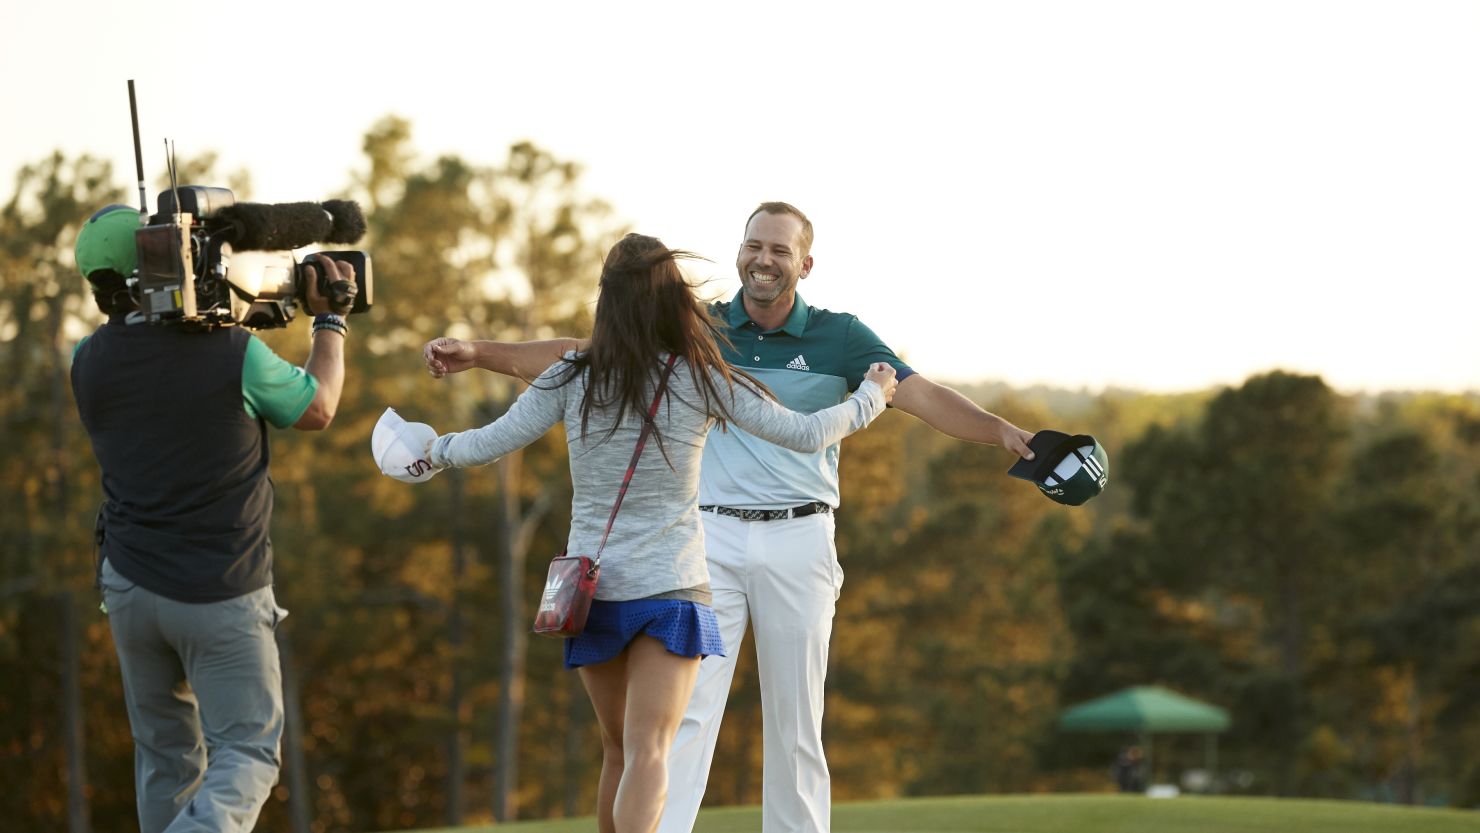 AUGUSTA, GA - APRIL 09:  Sergio Garcia of Spain embraces fiancee Angela Akins in celebration after defeating Justin Rose (not pictured) of England on the first playoff hole during the final round of the 2017 Masters Tournament at Augusta National Golf Club on April 9, 2017 in Augusta, Georgia.  (Photo by Harry How/Getty Images)